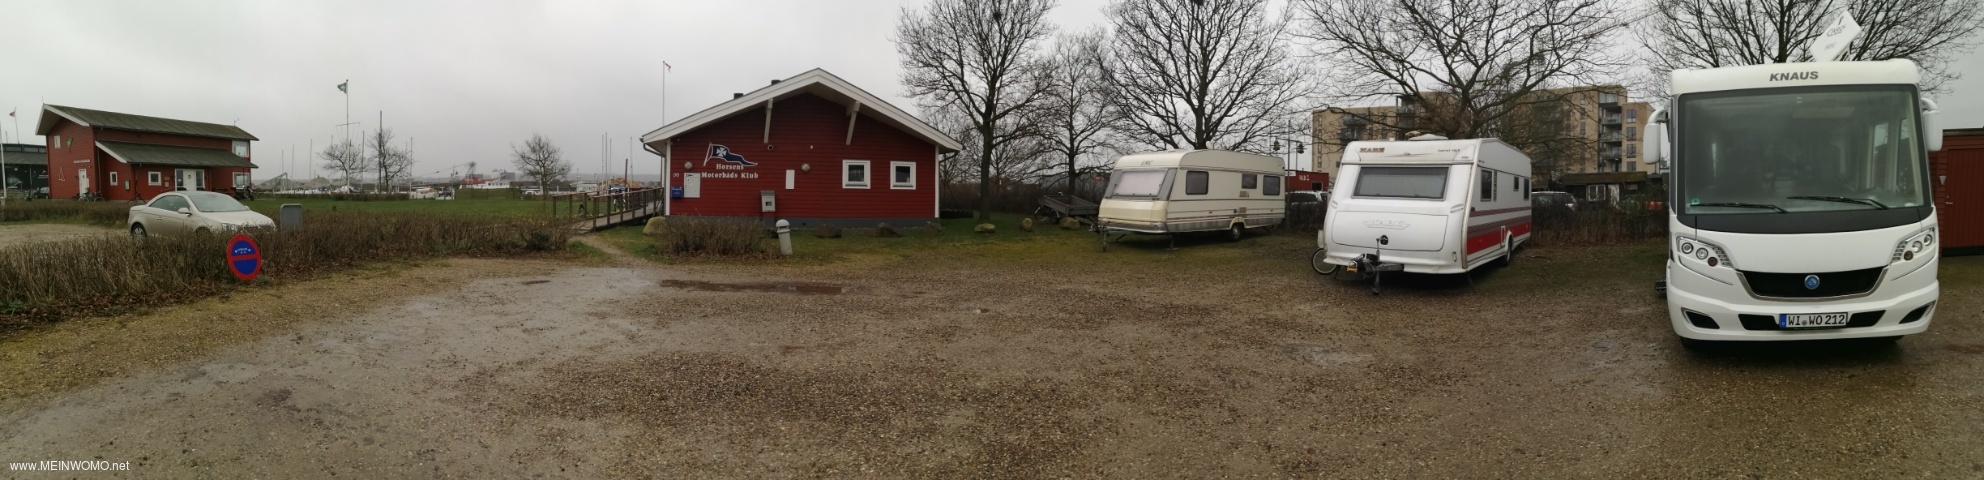 the 3 parking spaces that were occupied by a caravan except for one